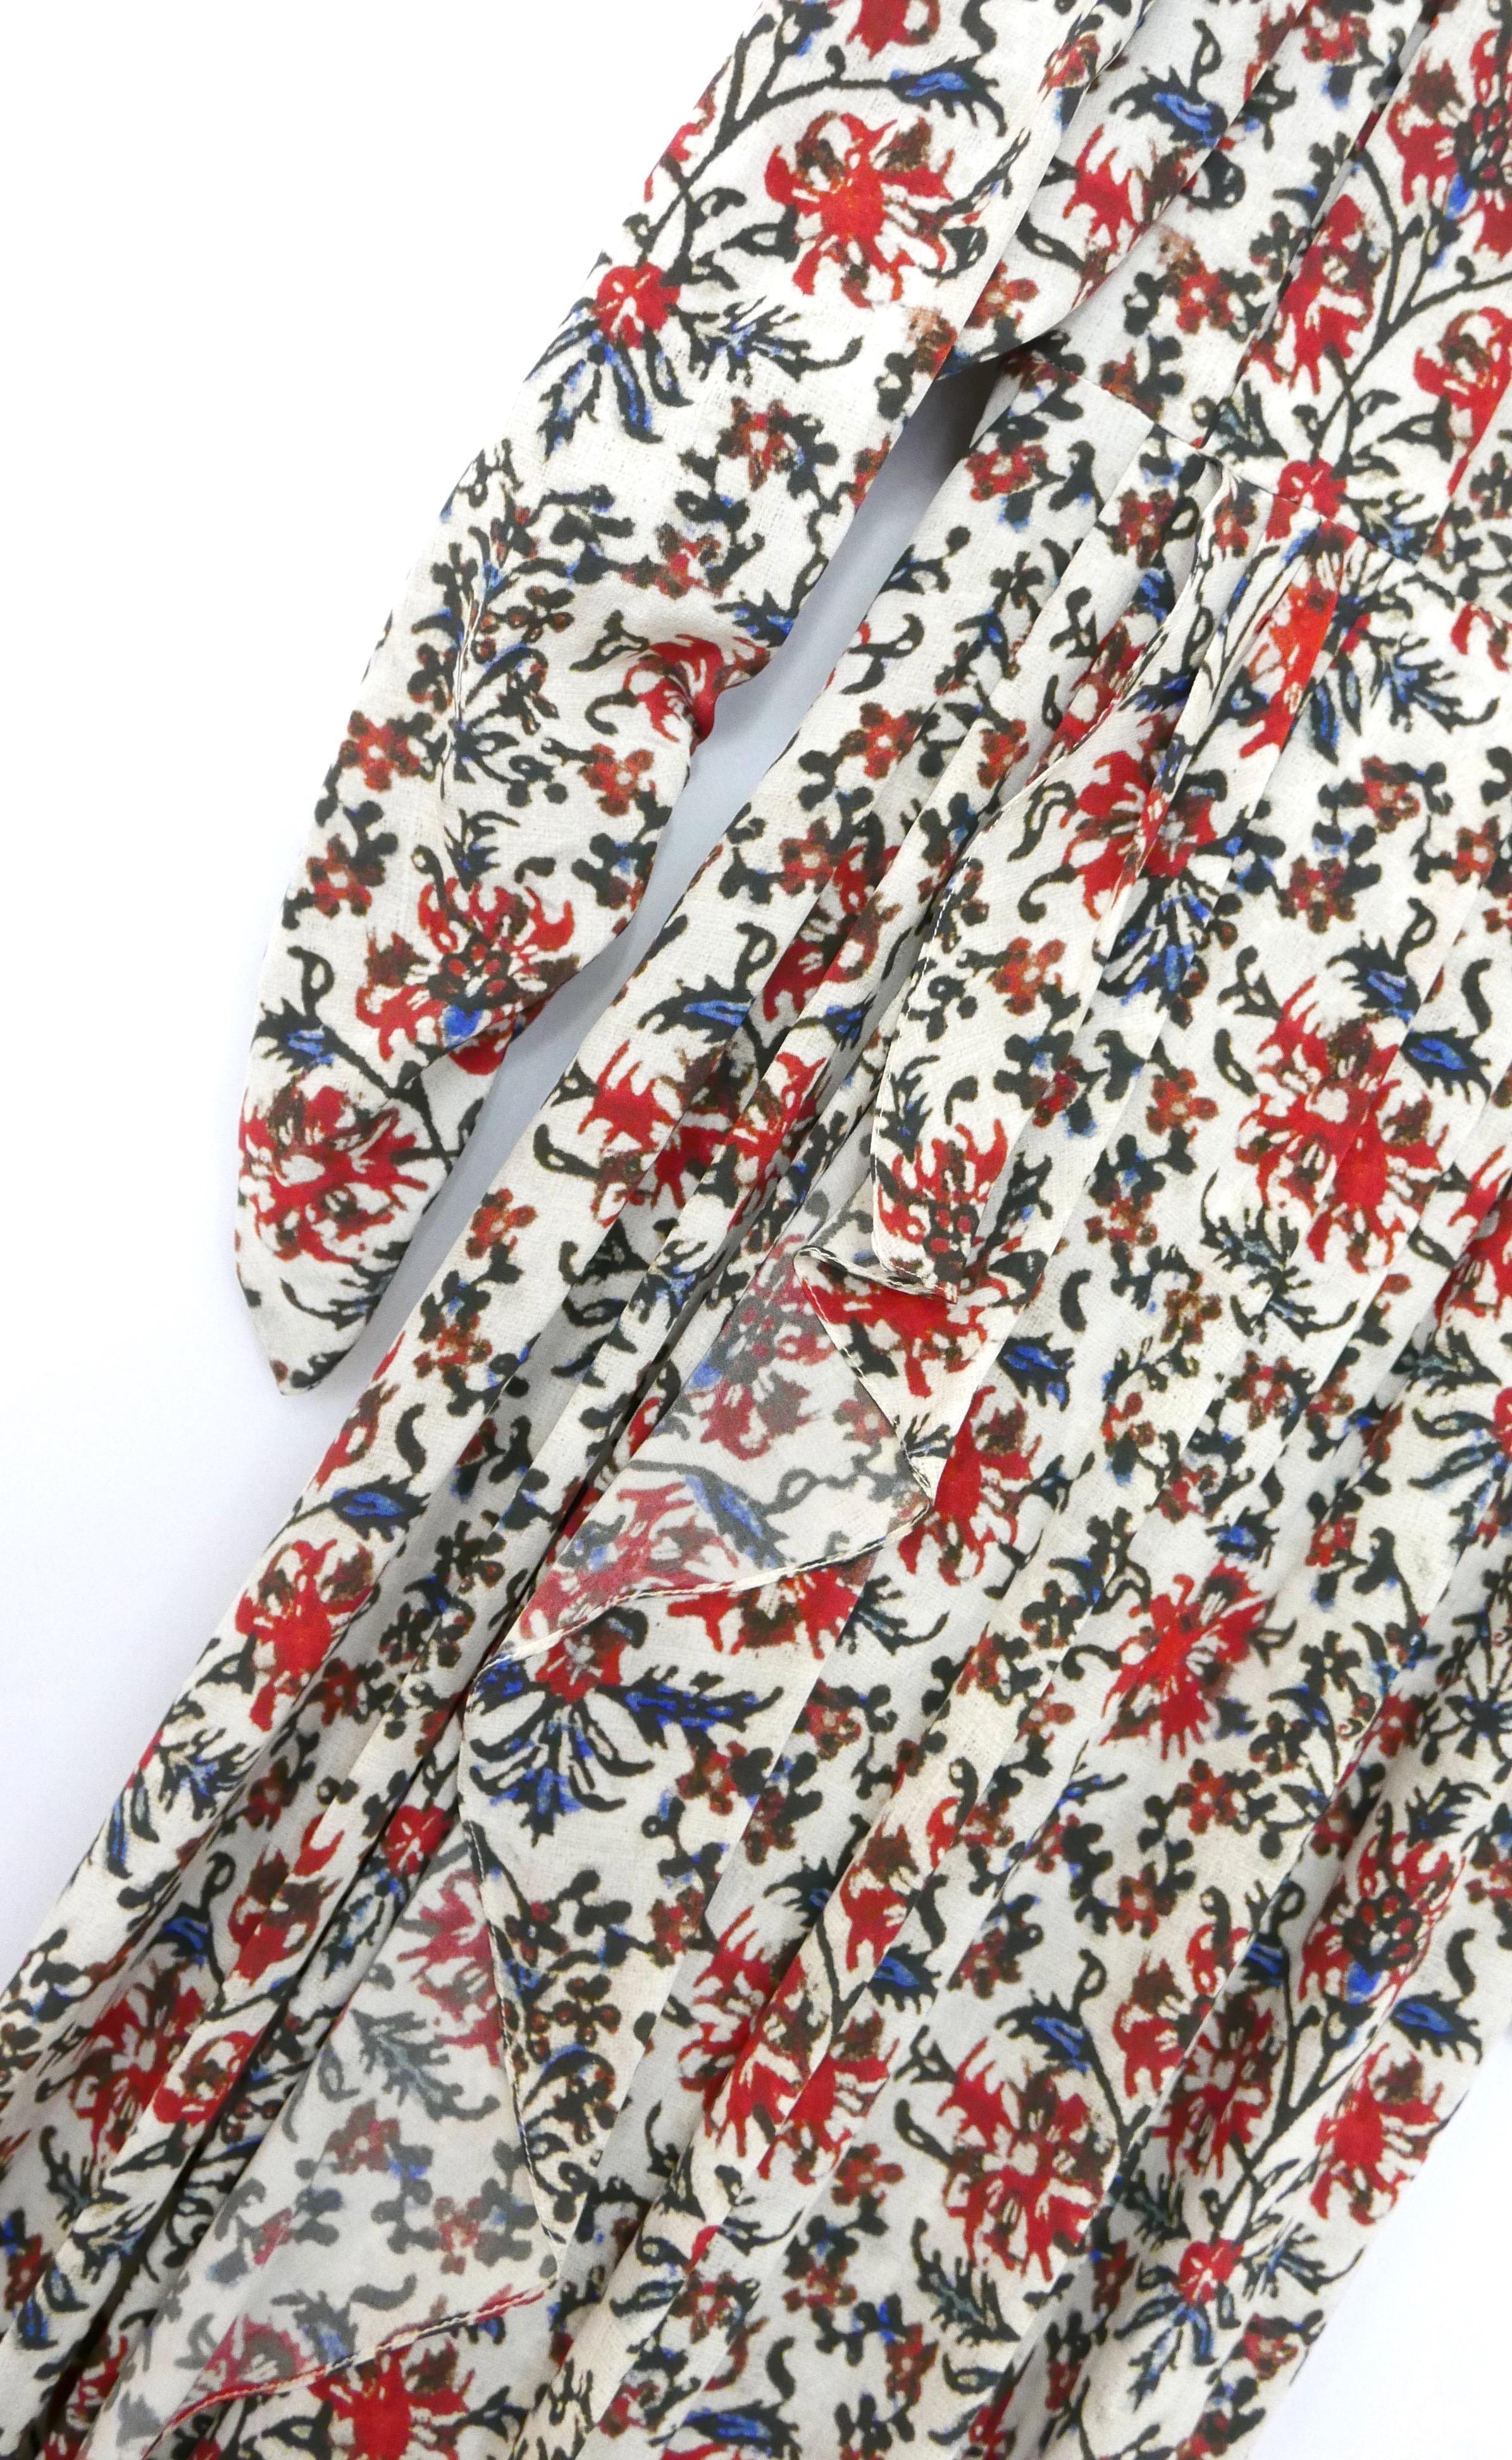 Isabel Marant Blaine Floral Stretch Silk Dress In New Condition For Sale In London, GB